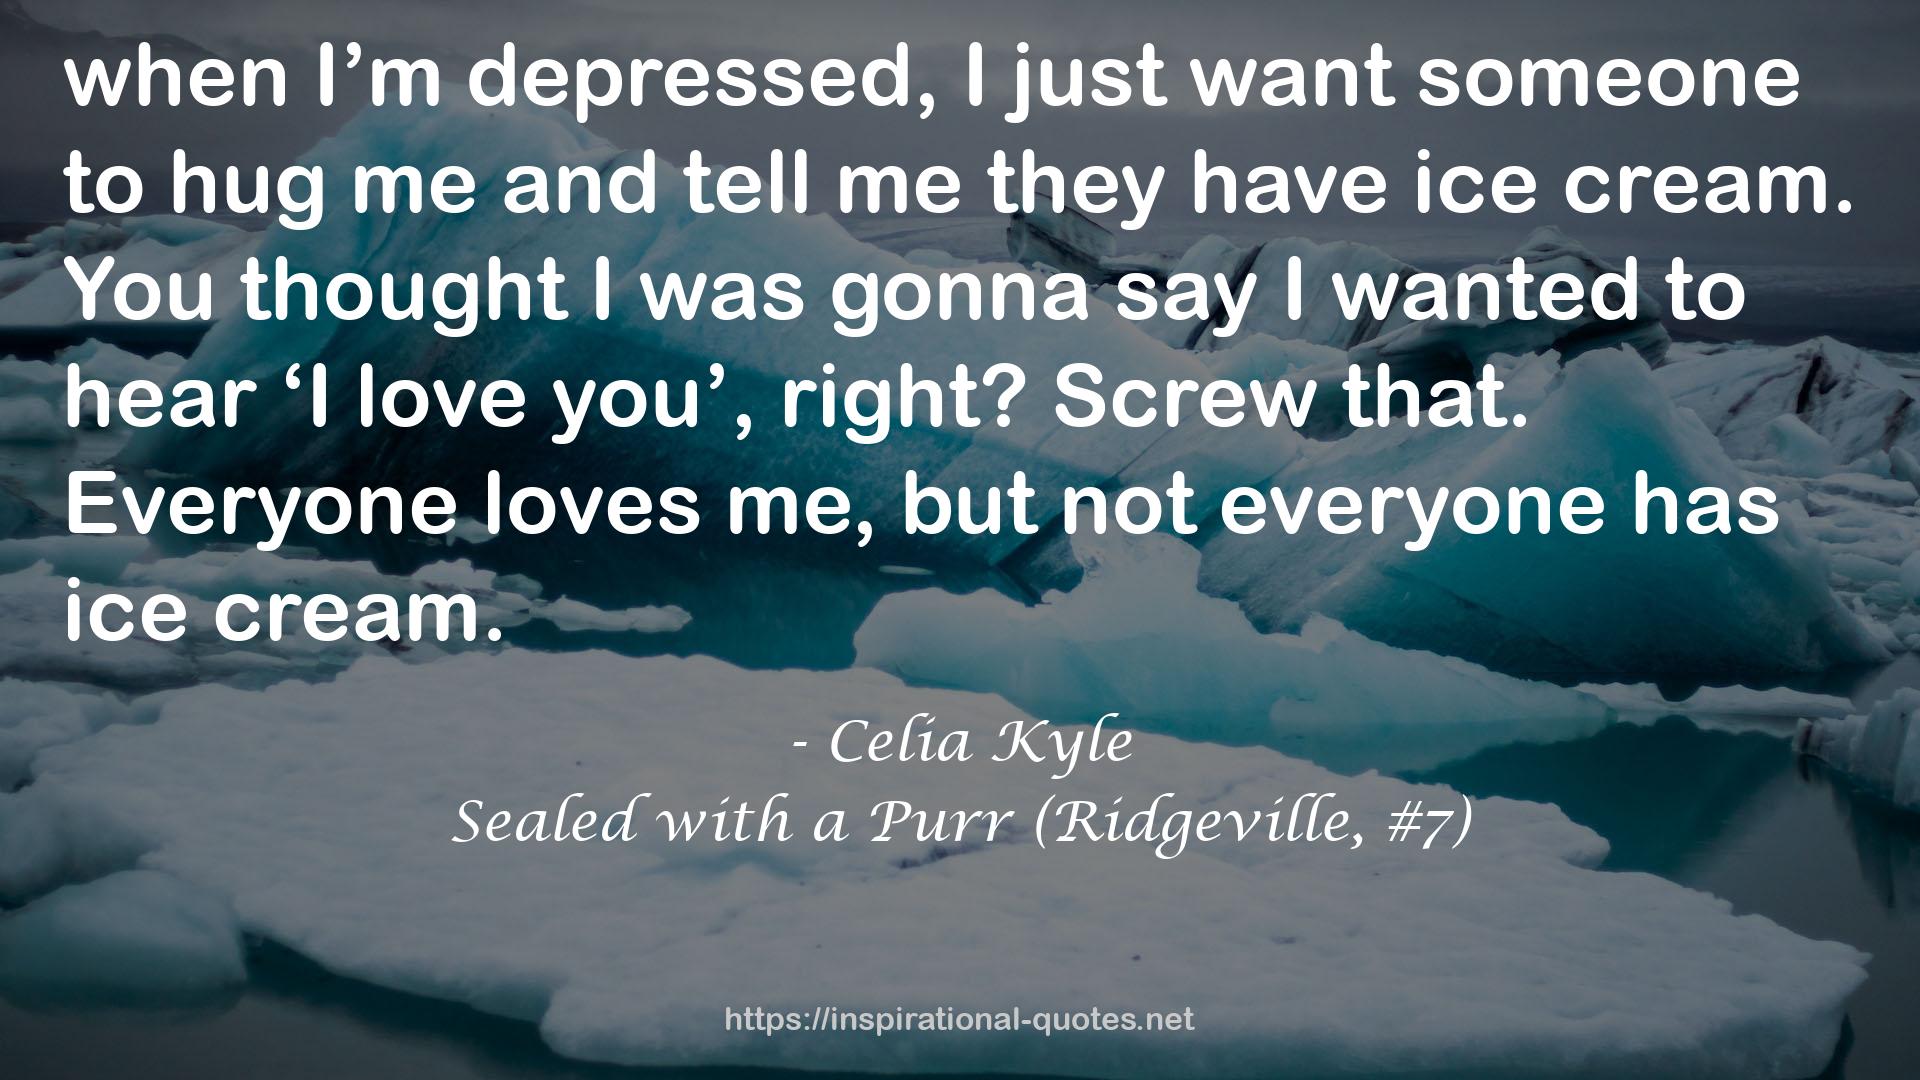 Sealed with a Purr (Ridgeville, #7) QUOTES